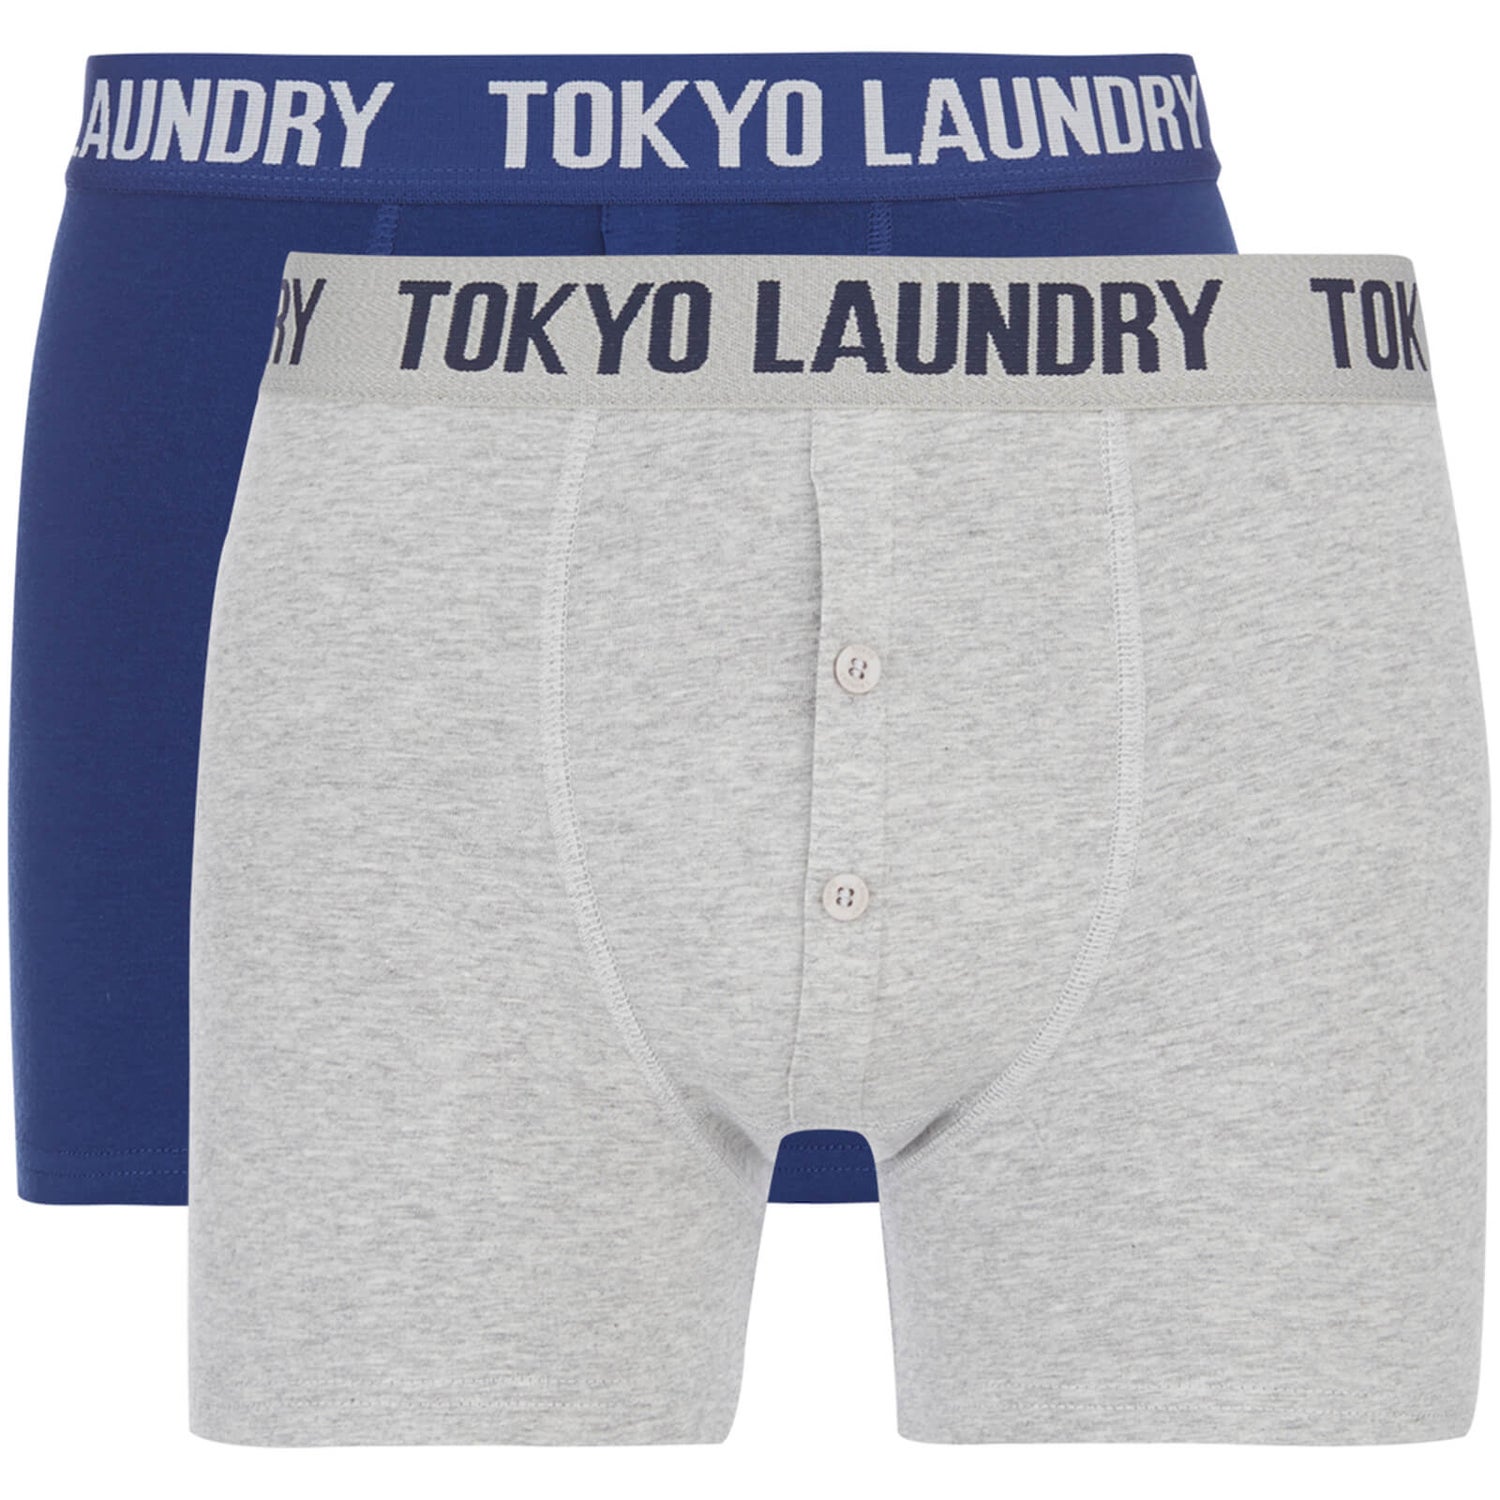 Tokyo Laundry Men's Coomer 2 Pack Boxers - Grey Marl/Sapphire Mens